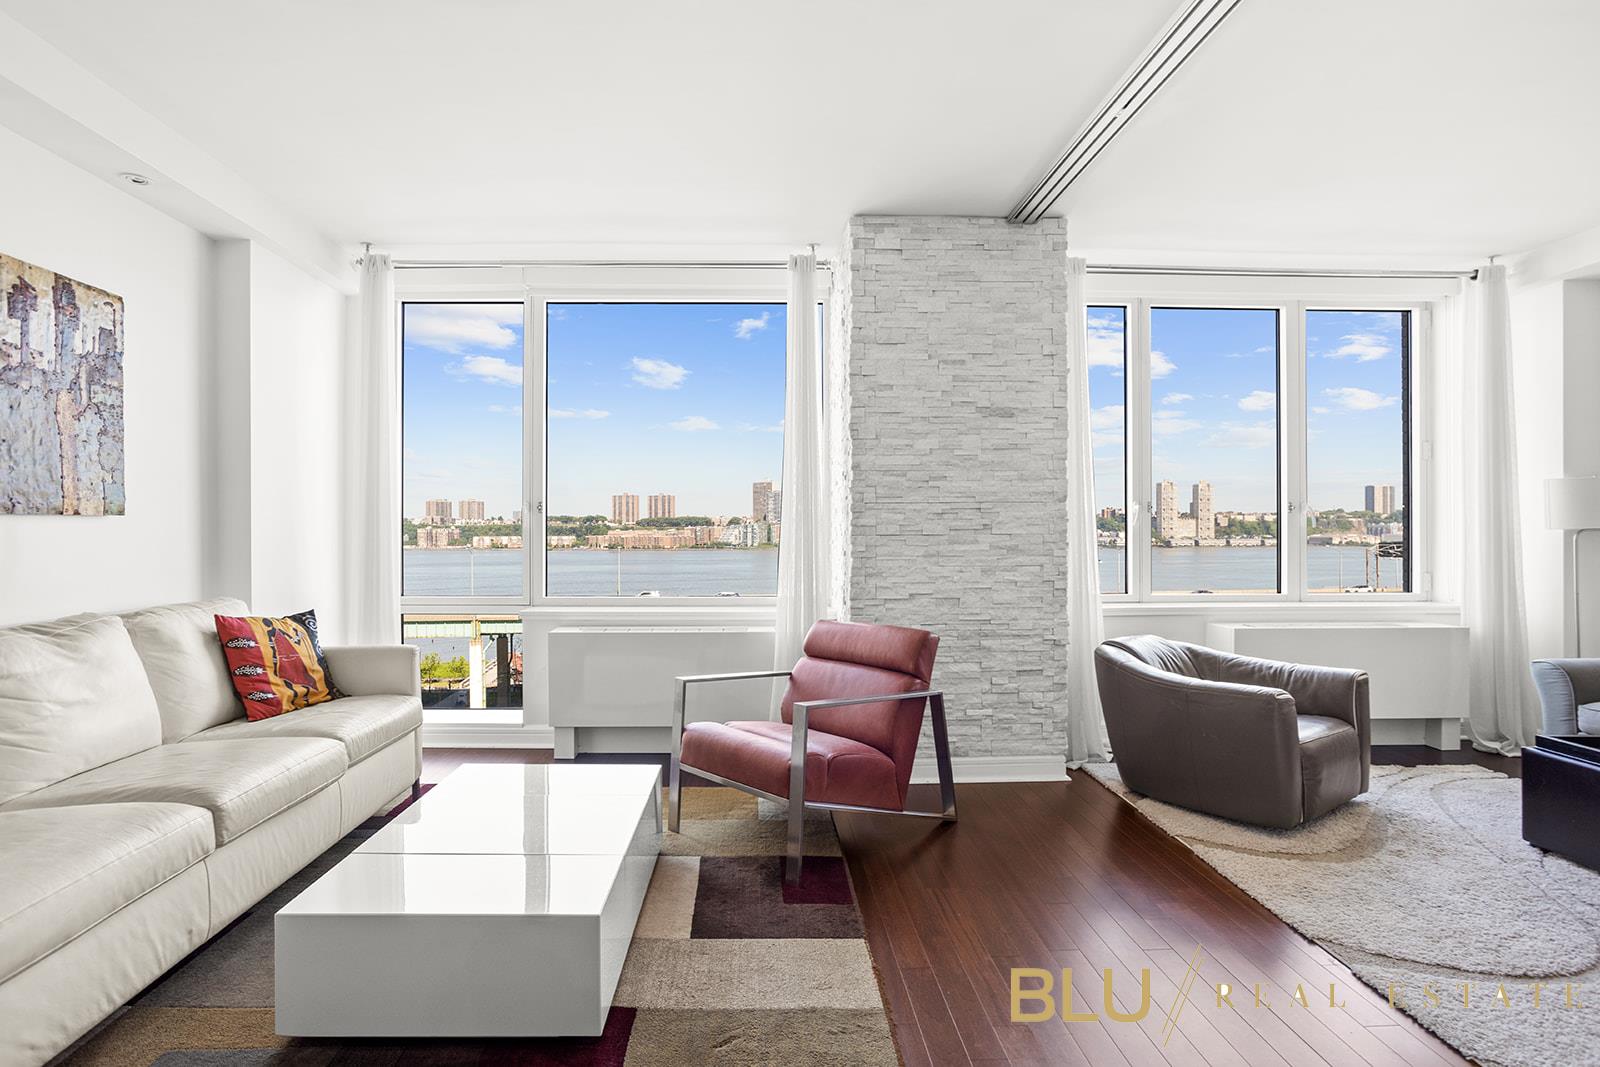 100 Riverside Boulevard 7-H, Lincoln Square, Upper West Side, NYC - 2 Bedrooms  
2 Bathrooms  
4 Rooms - 